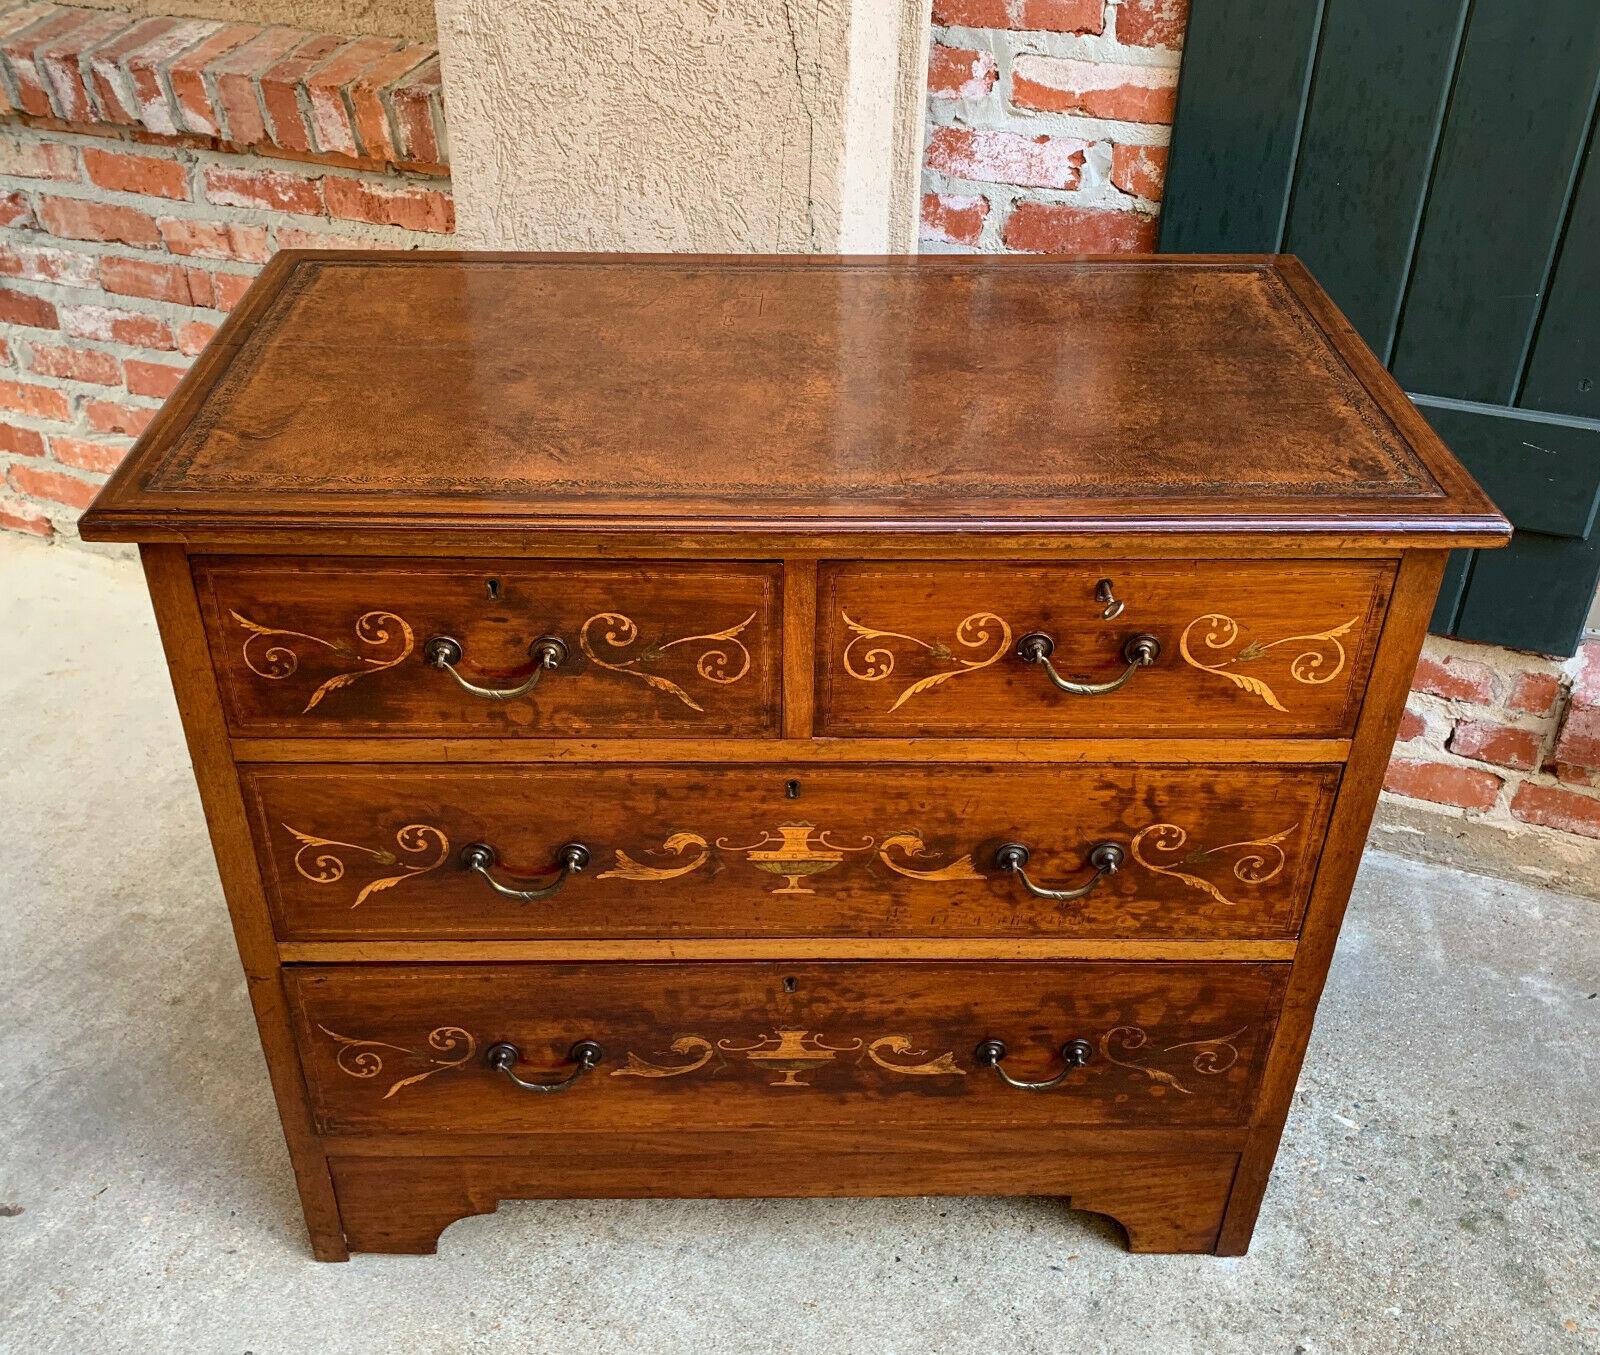 ~Direct from England~
~Lovely and versatile antique English inlaid chest of drawers WITH EMBOSSED LEATHER TOP!~
~FOUR DRAWERS, two smaller over two large drawers~
~Original hand painted designs on each drawer front~
~Original drawer